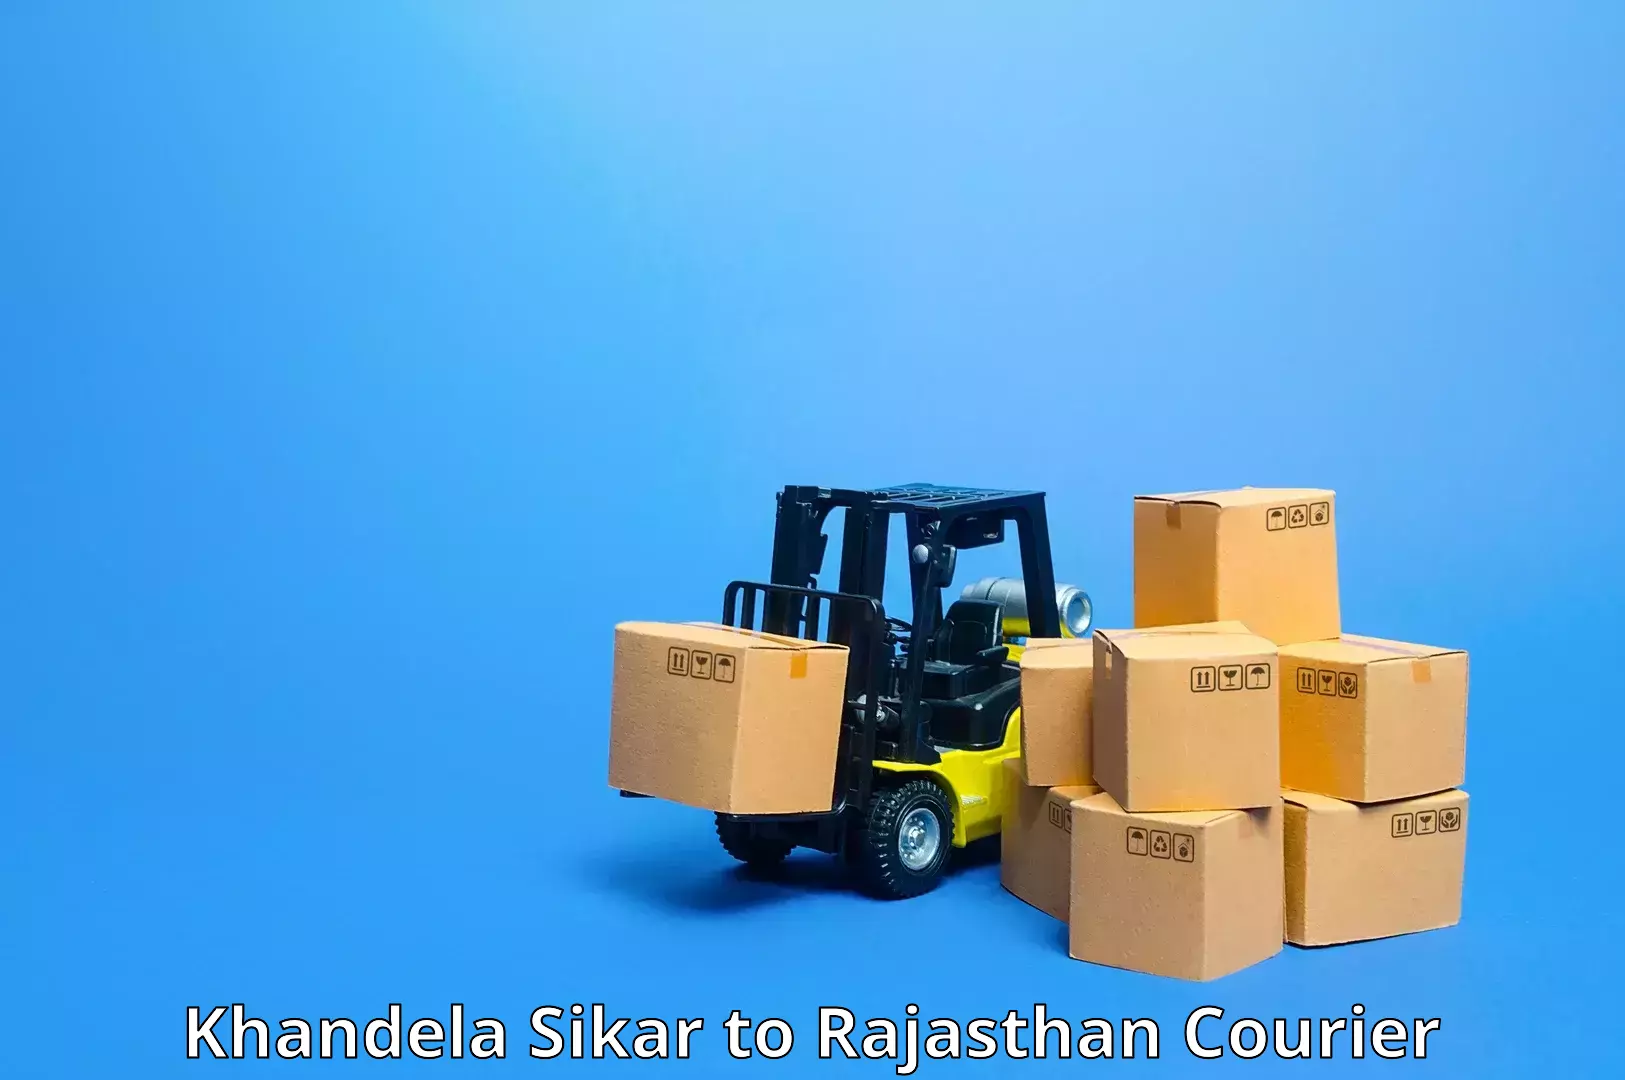 Tailored delivery services Khandela Sikar to Pali